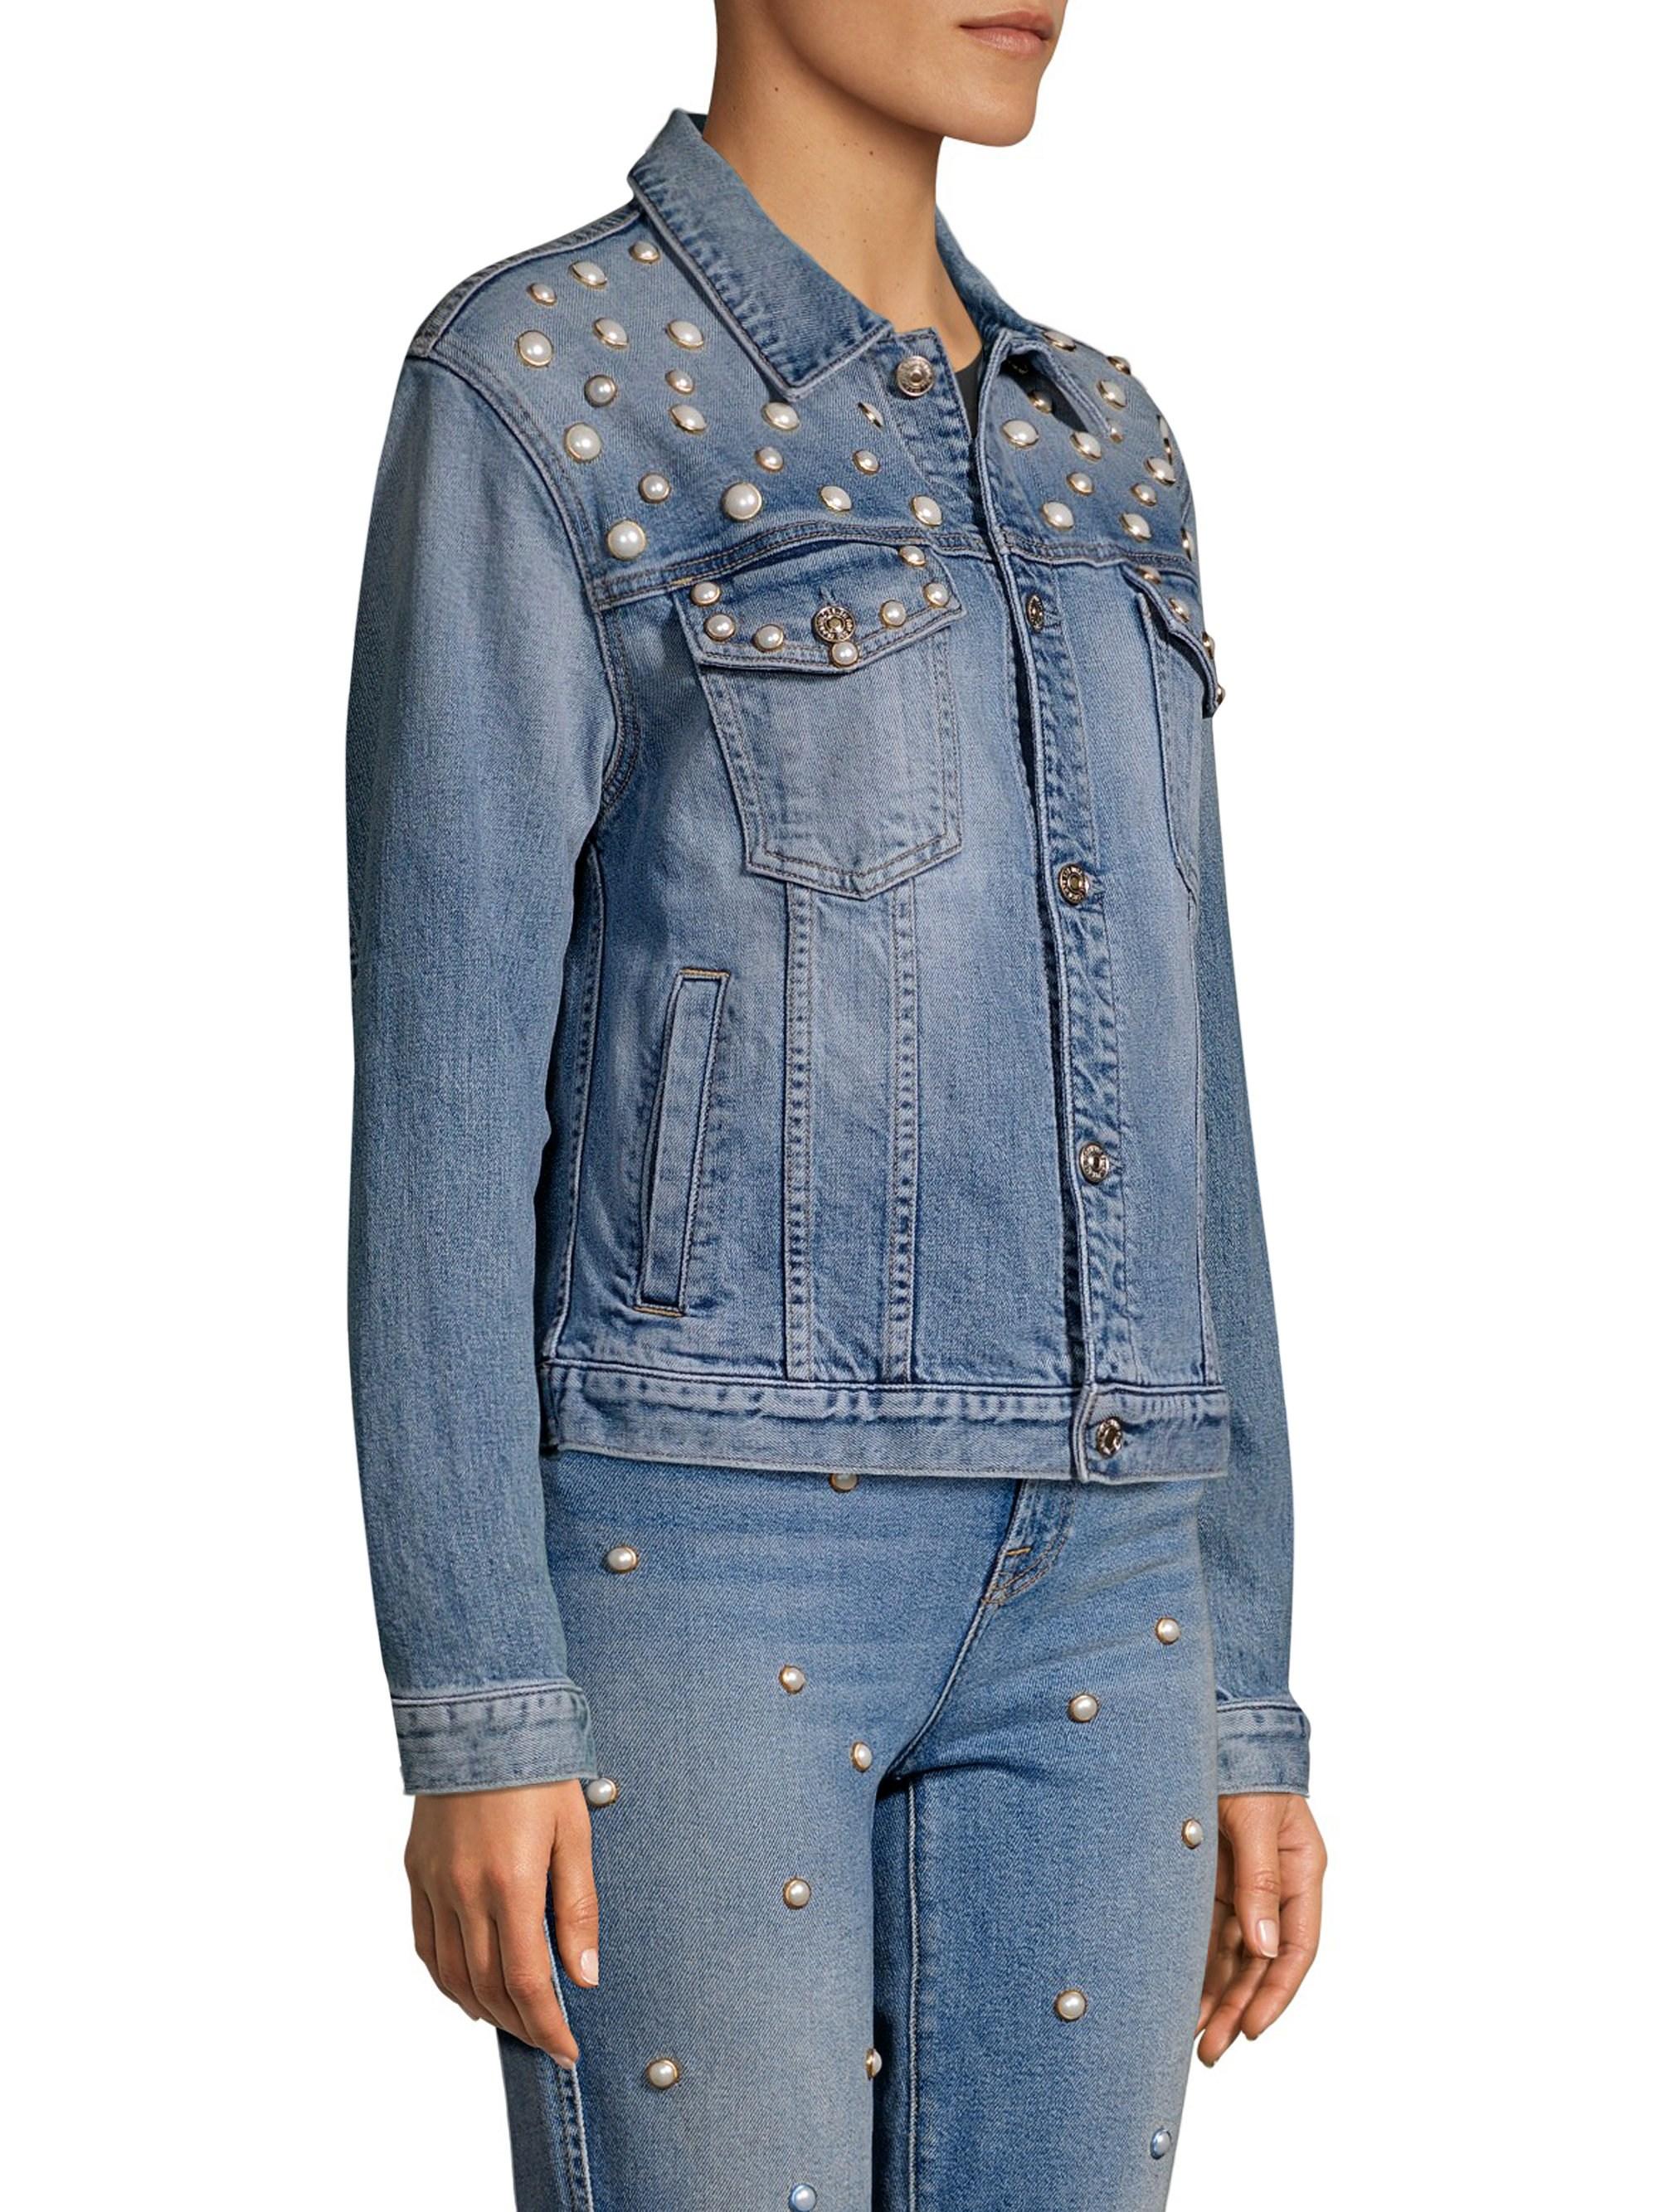 Lyst - 7 For All Mankind Faux Pearl Embellished Denim Jacket in Blue